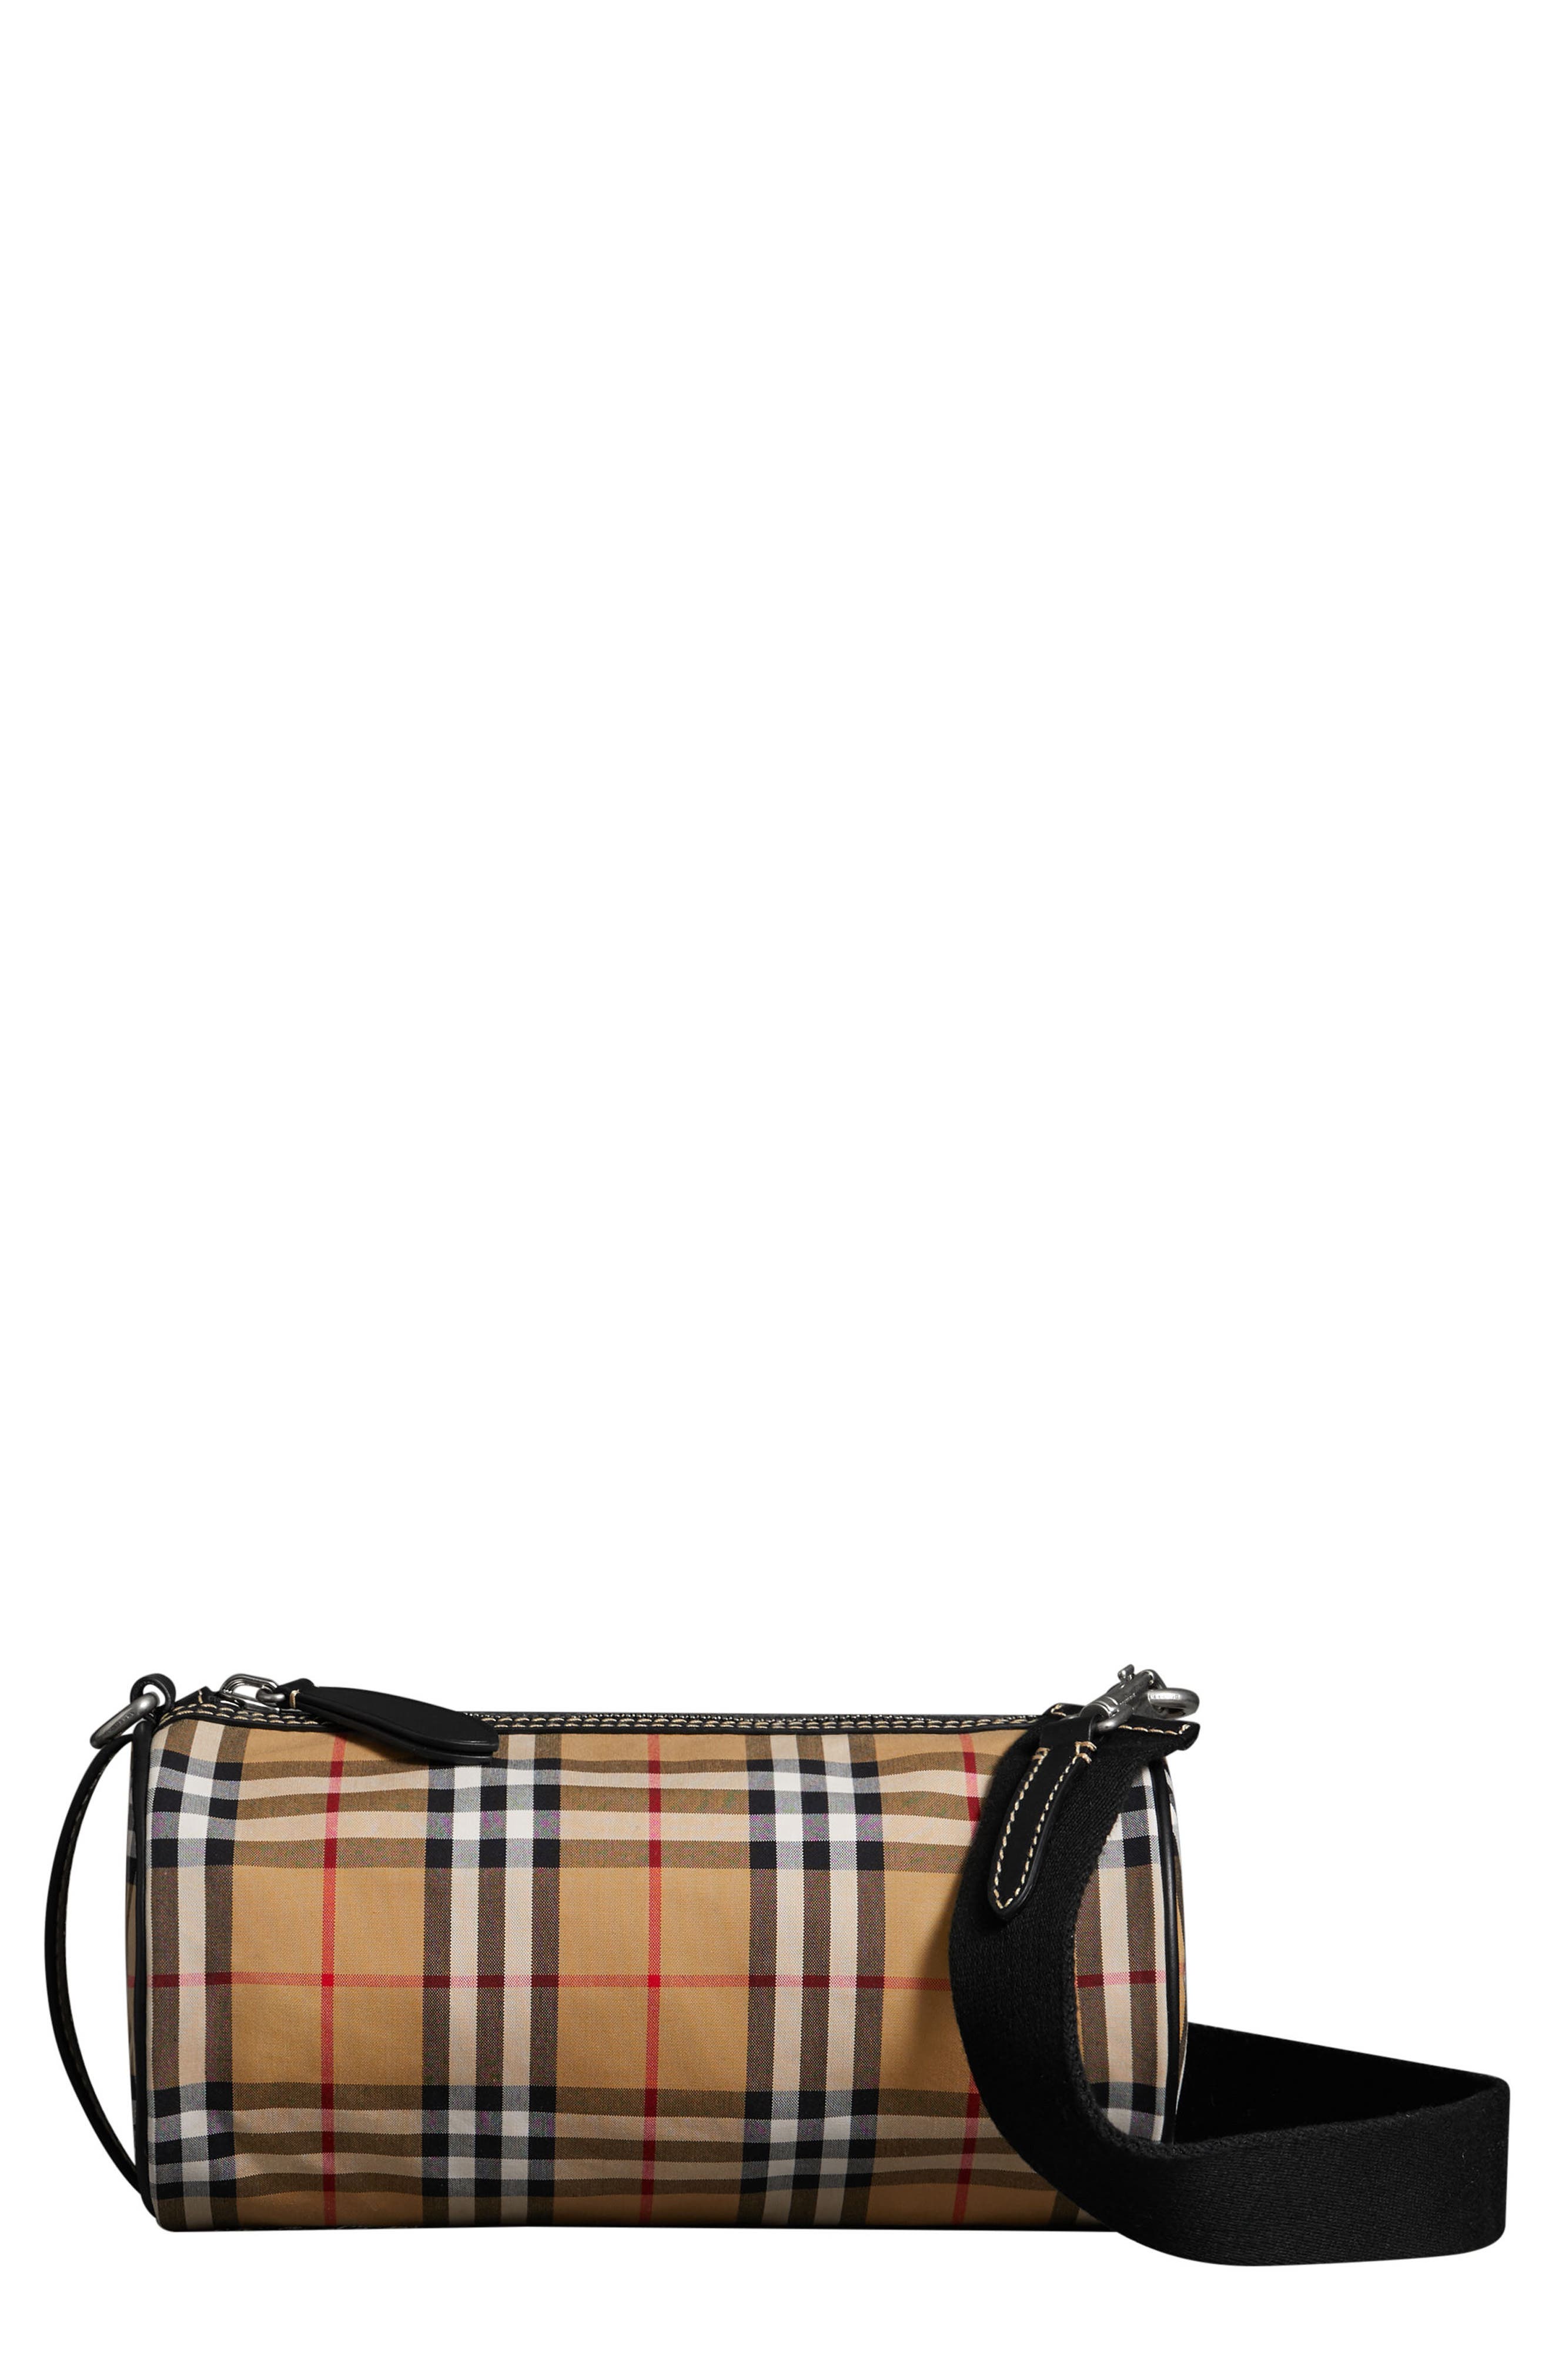 burberry small vintage check duffle